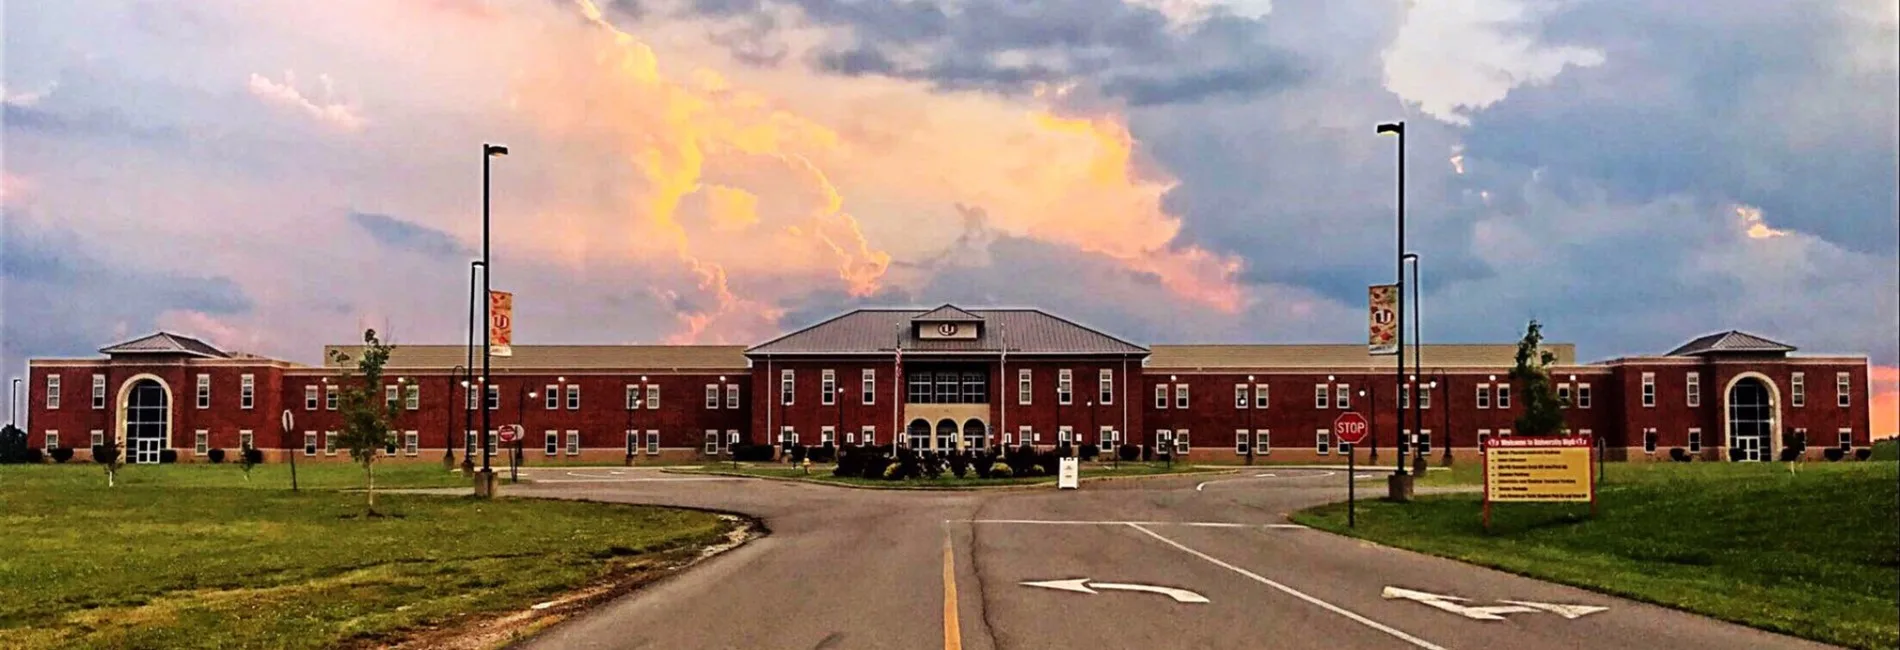 UHS red brick high school with clouds and sunlight 